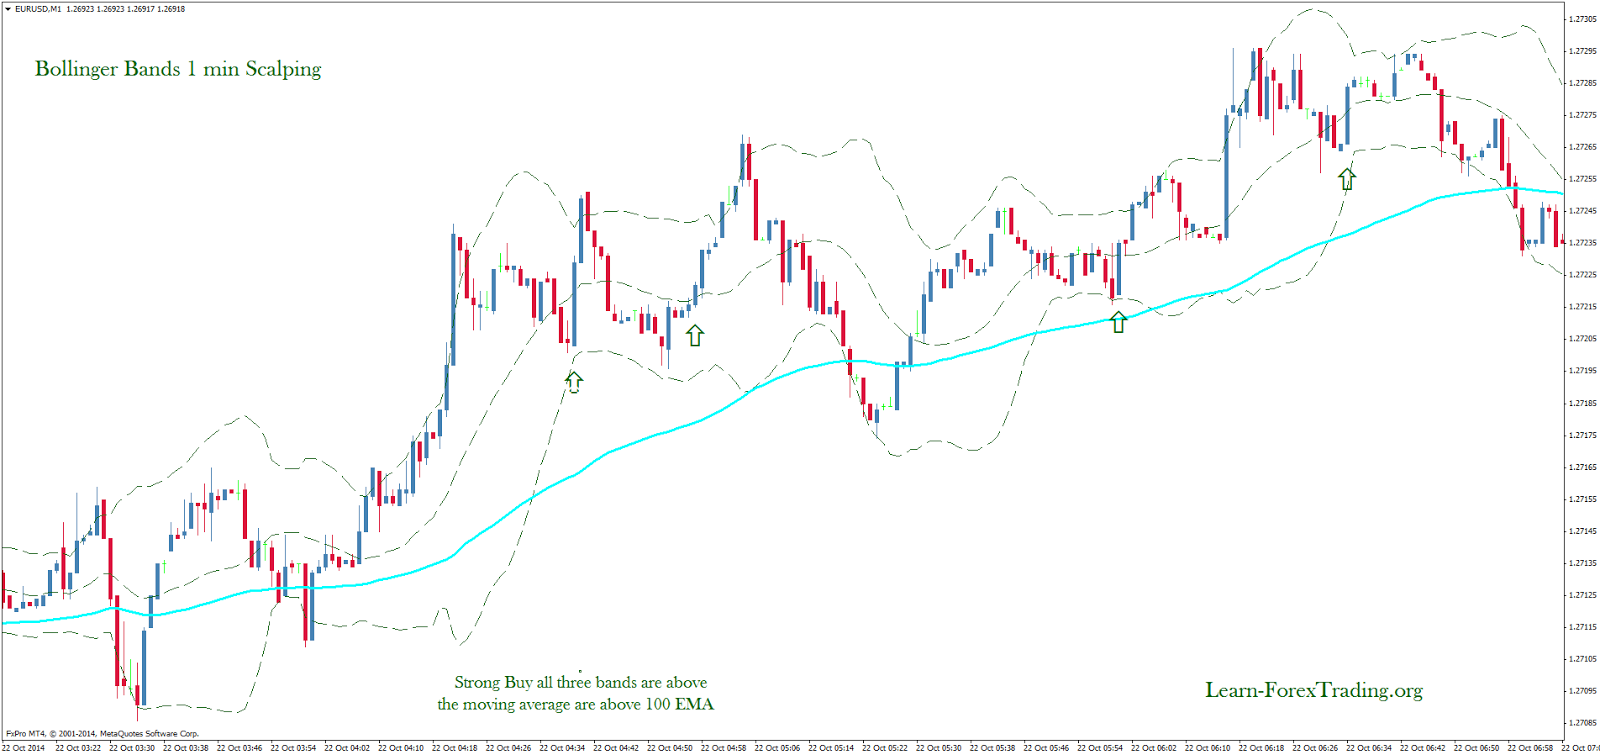 Bollinger Bands 1 min Scalping